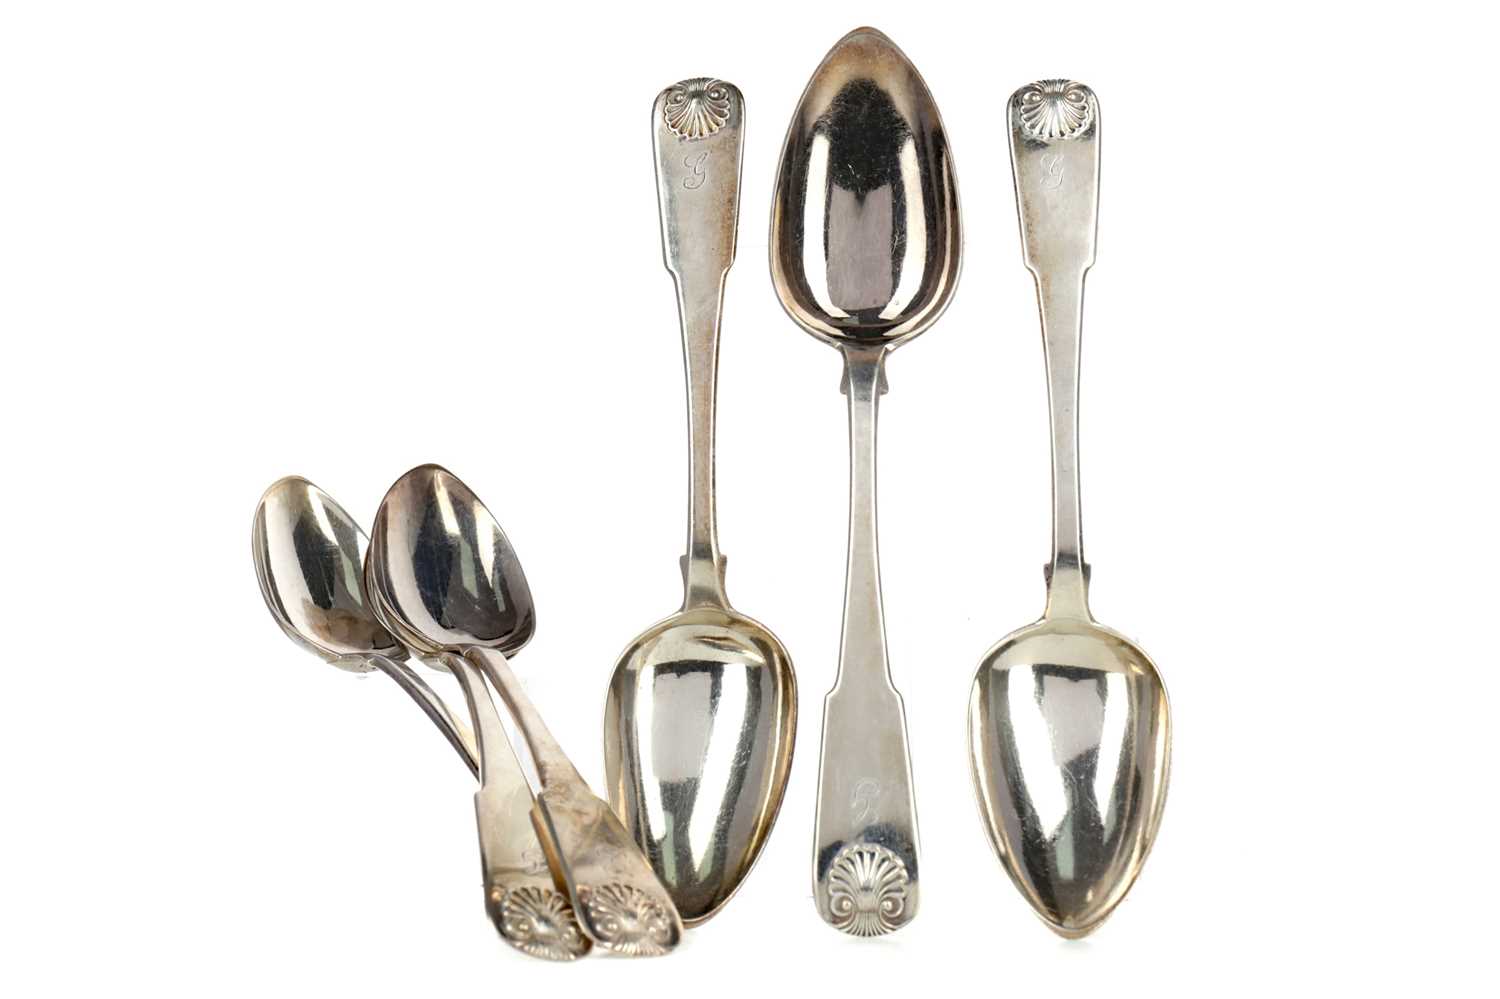 Lot 405 - A SET OF SIX SCOTTISH PROVINCIAL SILVER TABLE SPOONS